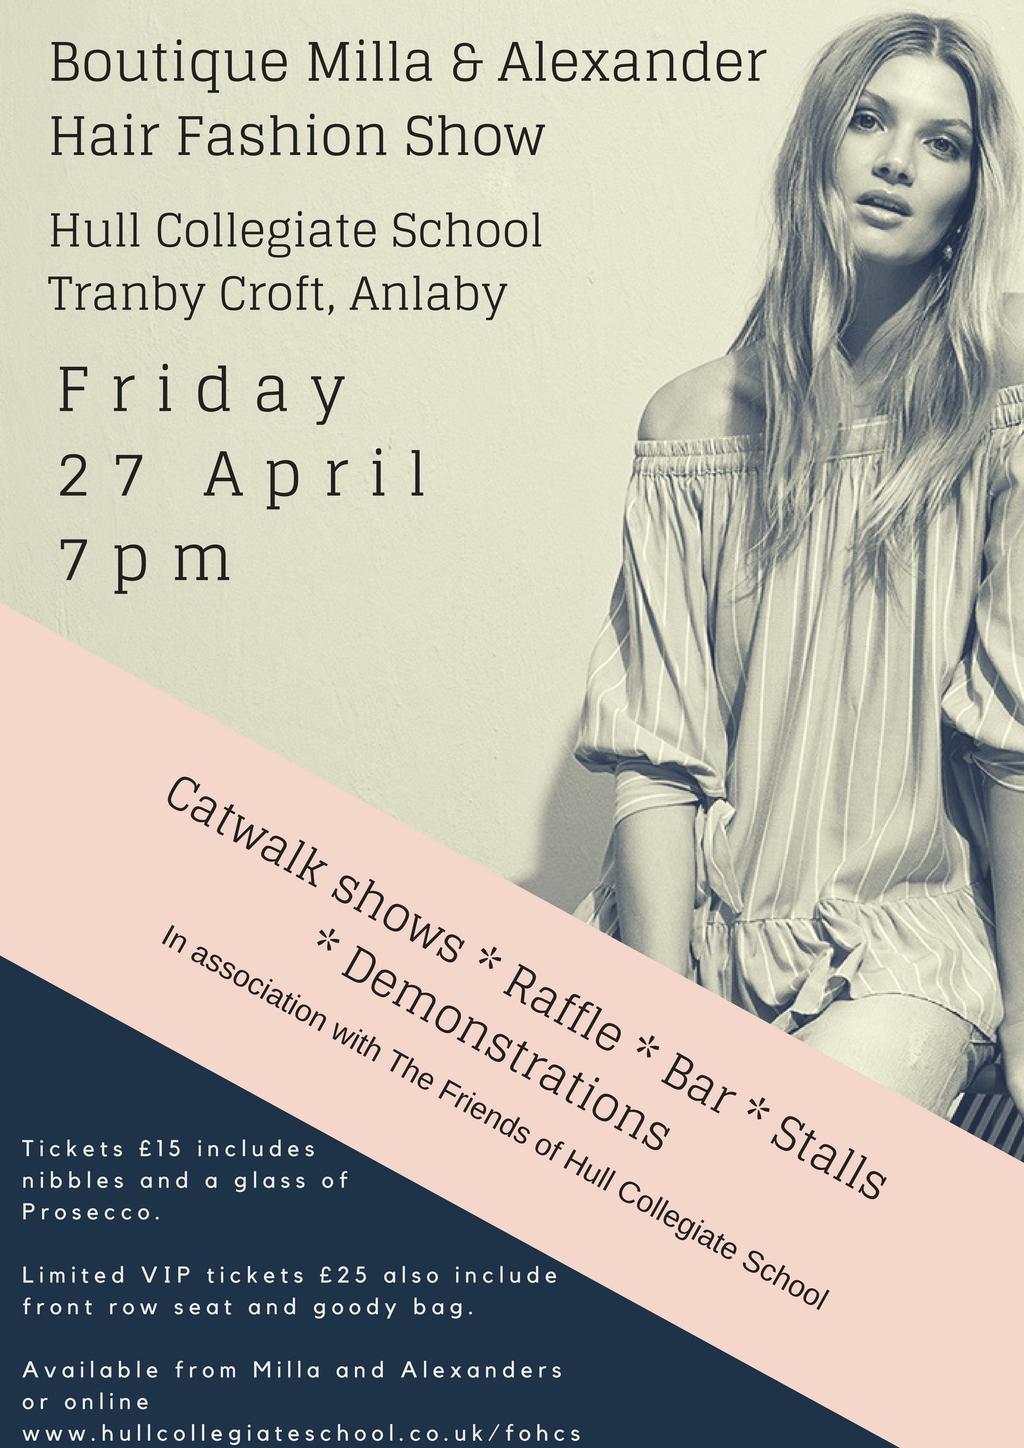 Boutique Milla and Alexander Hair Fashion Show, Friday 27 April Enjoy catwalk shows, hair and makeup demonstrations, access to stall holders, exclusive raffle prizes and much more.